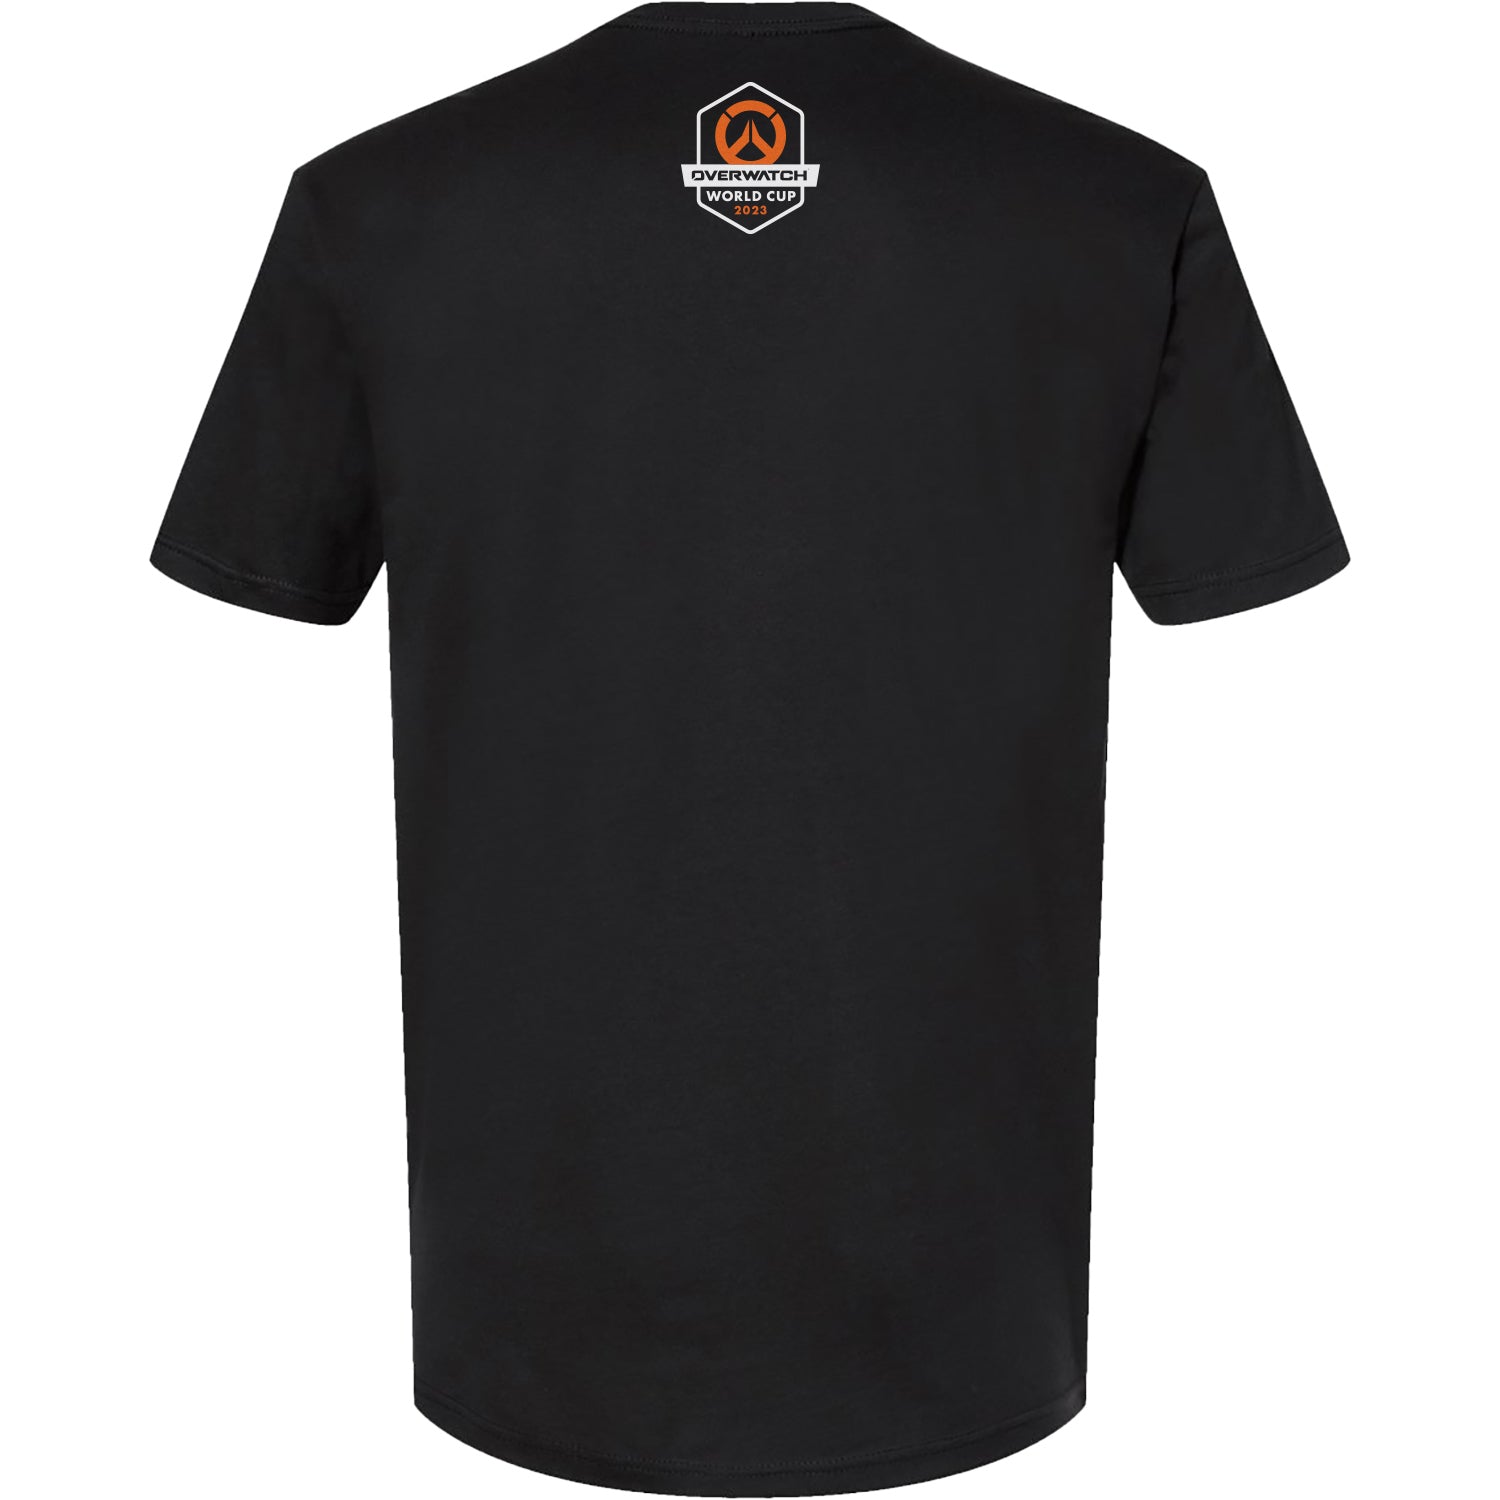 Overwatch World Cup Black T-Shirt - Back View